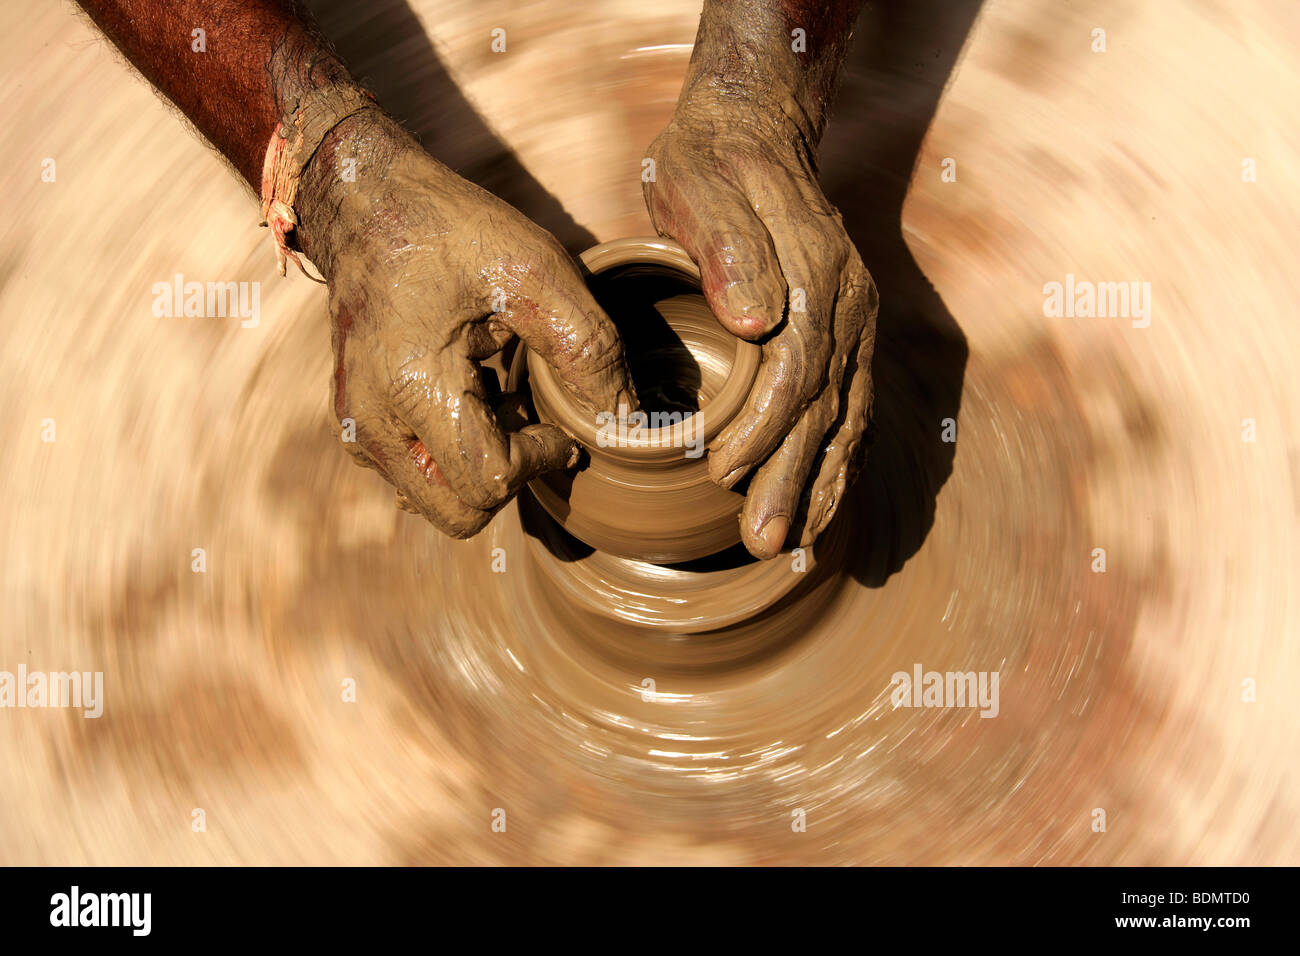 Hands of a potter, 58, in Dunjarpur, forming a piece of pottery on the potter's wheel, Rajasthan, India, Asia Stock Photo